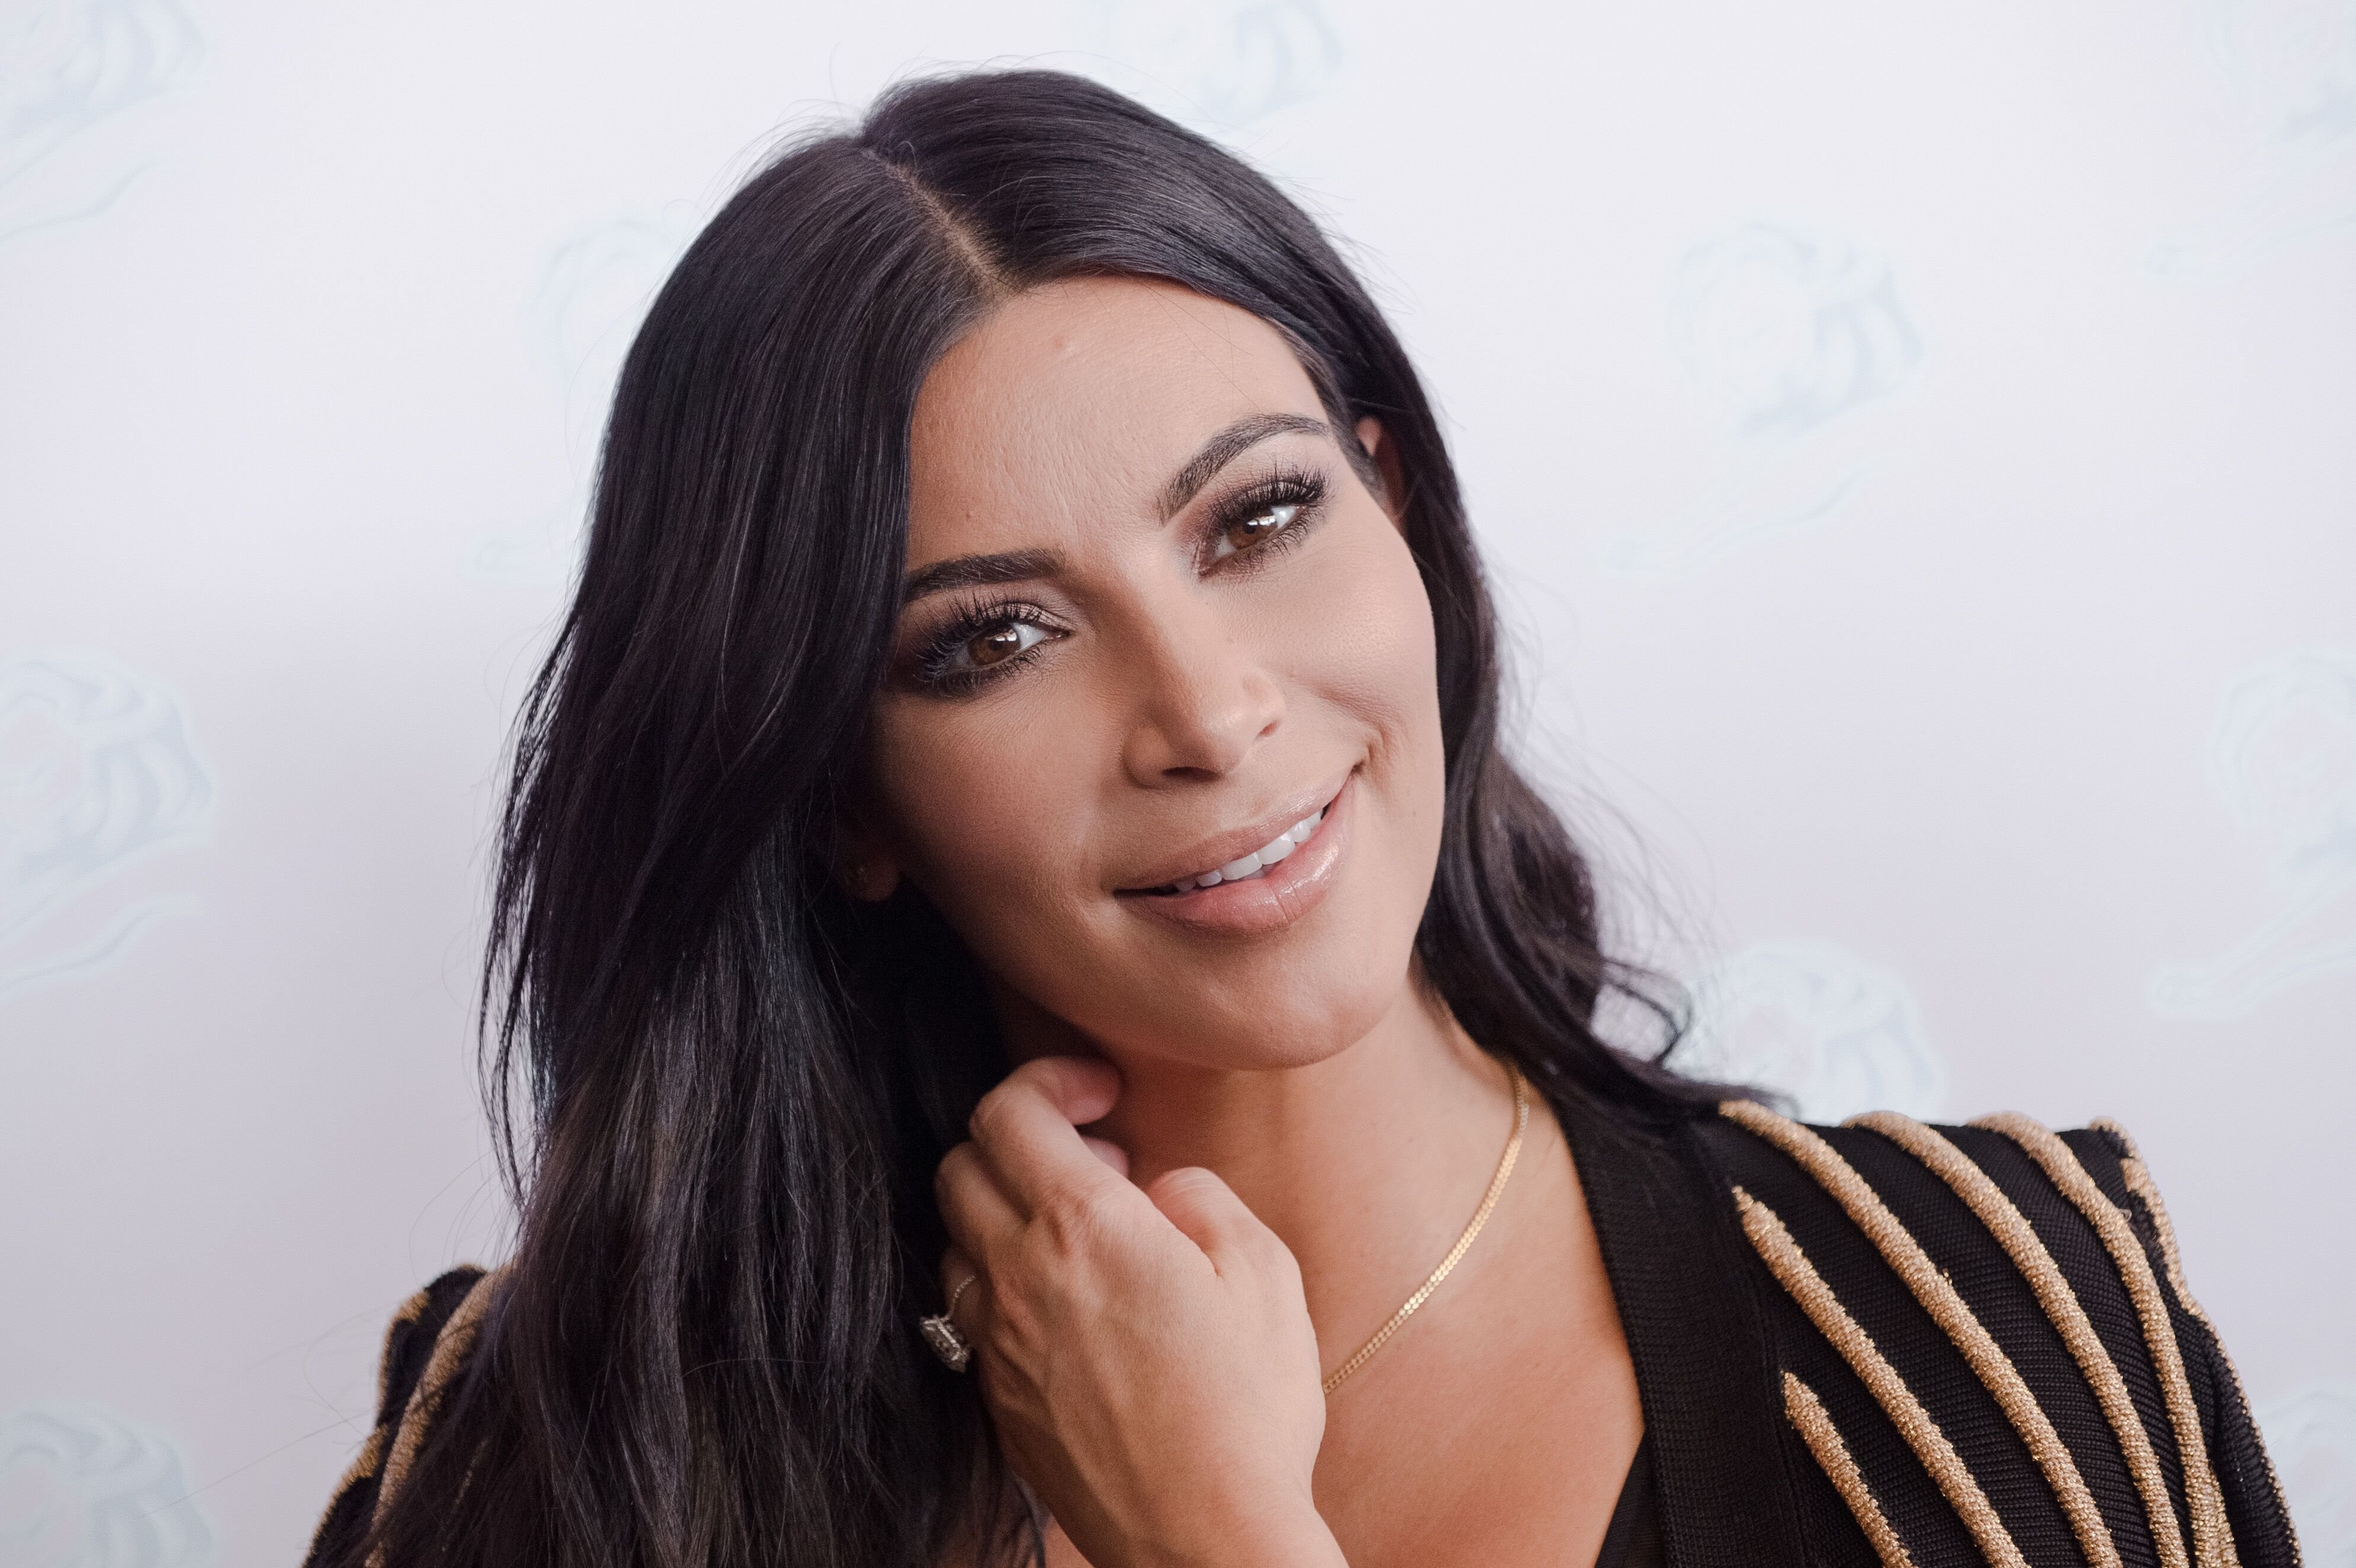 Kim Kardashian attends a 'Sudler' talk during Cannes Lions International Festival of Creativity on June 24, 2015 | Photo: Getty Images